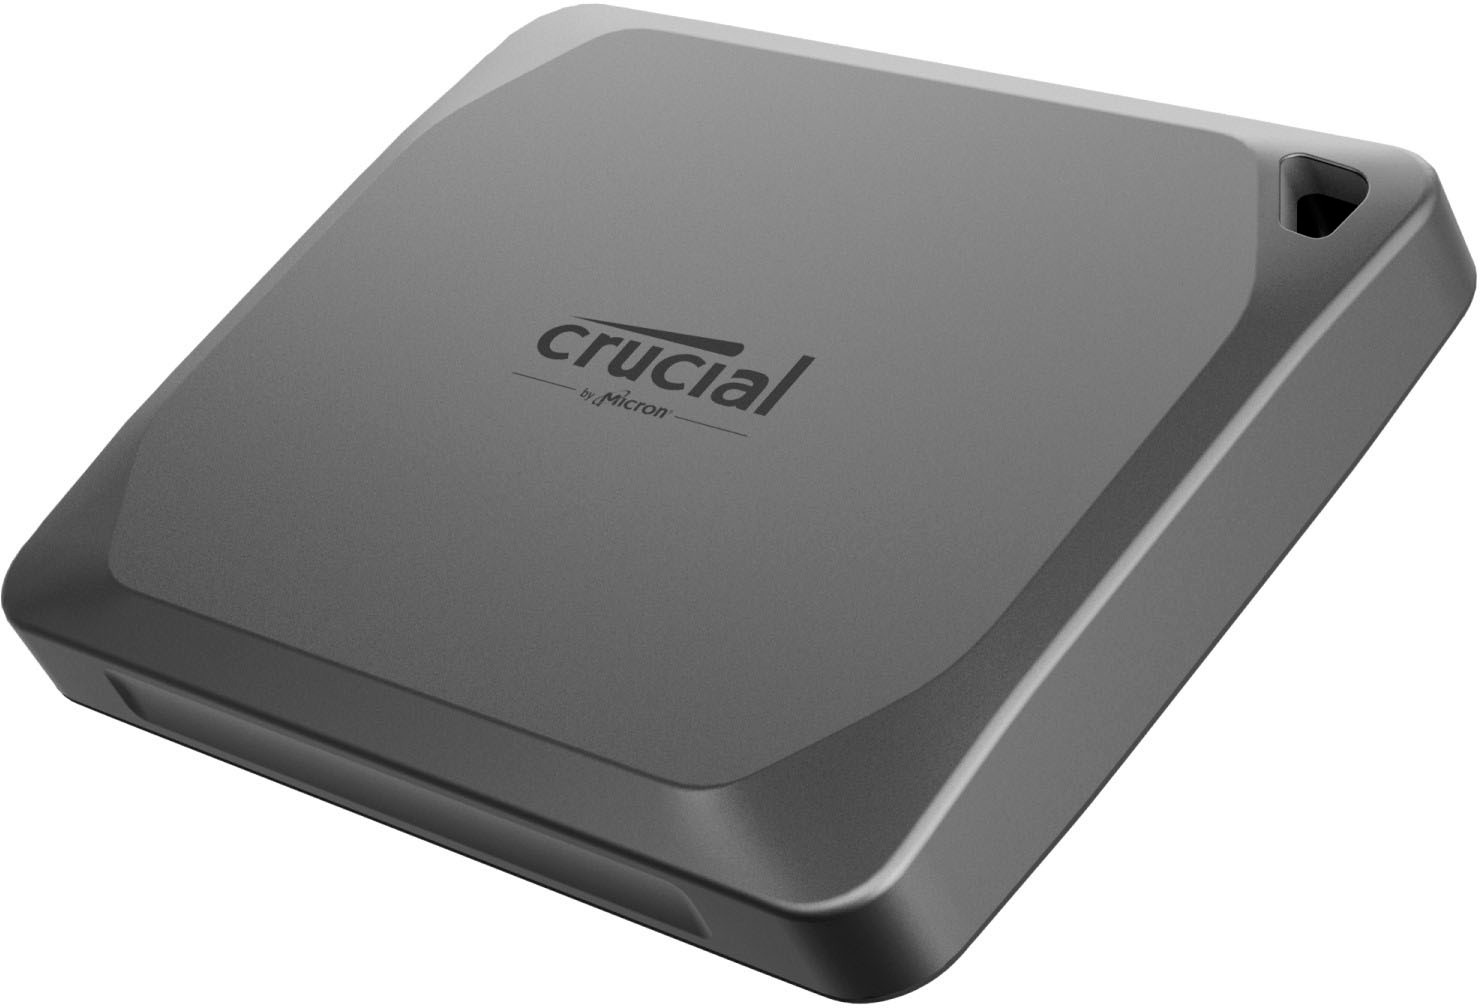 Crucial Unveils X9 Portable SSD: QLC for the Cost-Conscious Consumer